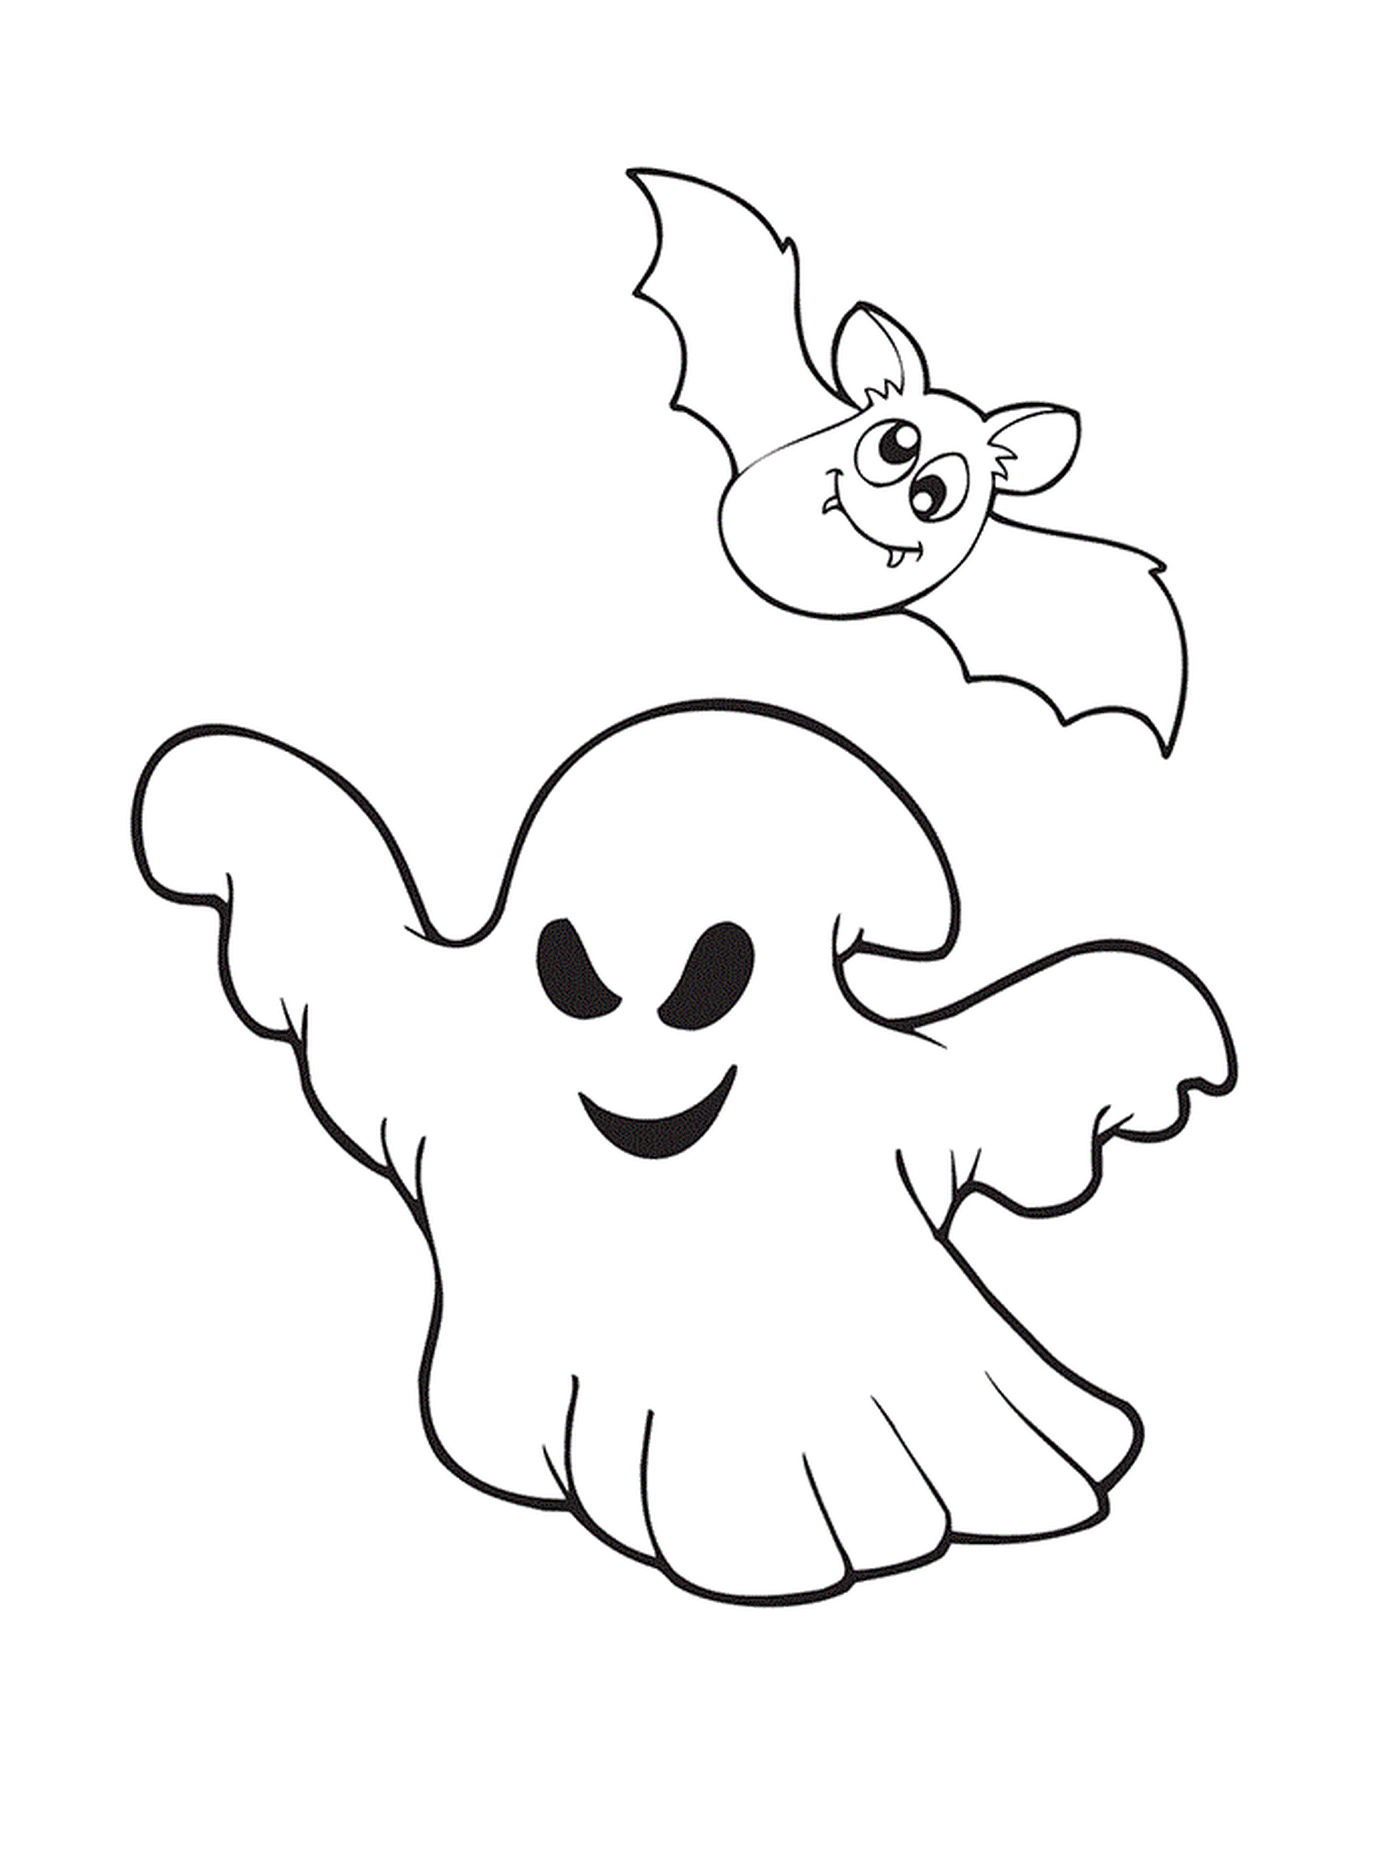  Ghost and bat for Halloween 